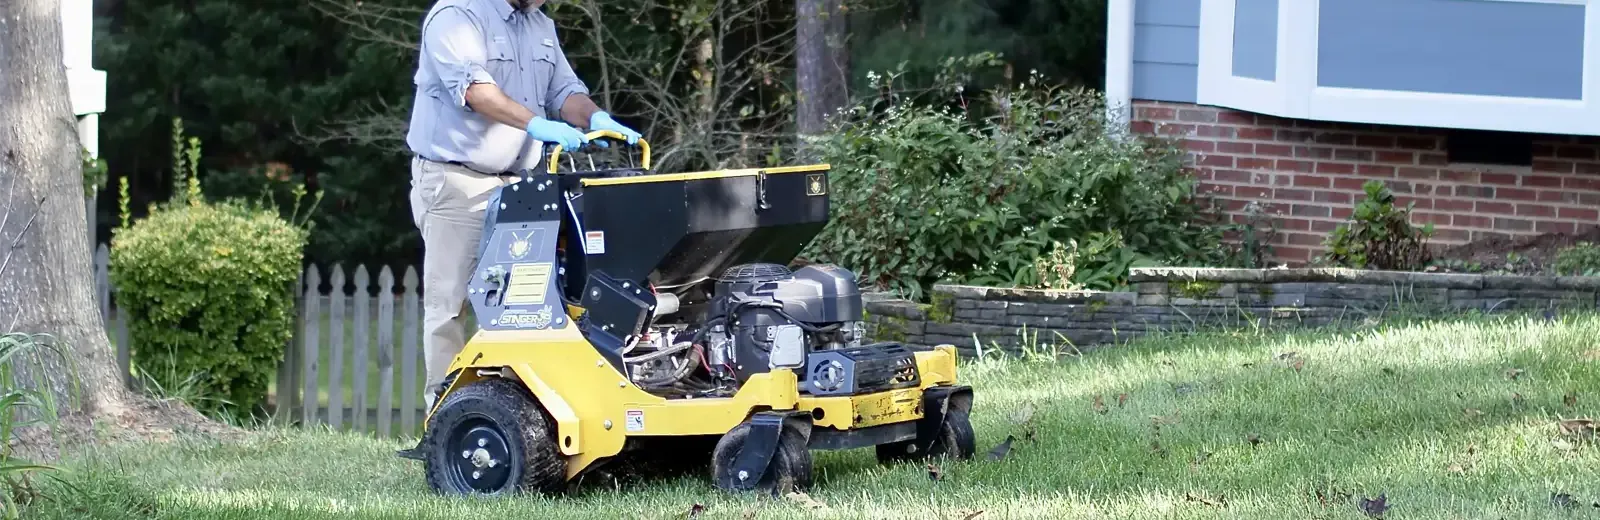 Tech riding stand-on lawn aerator equipment